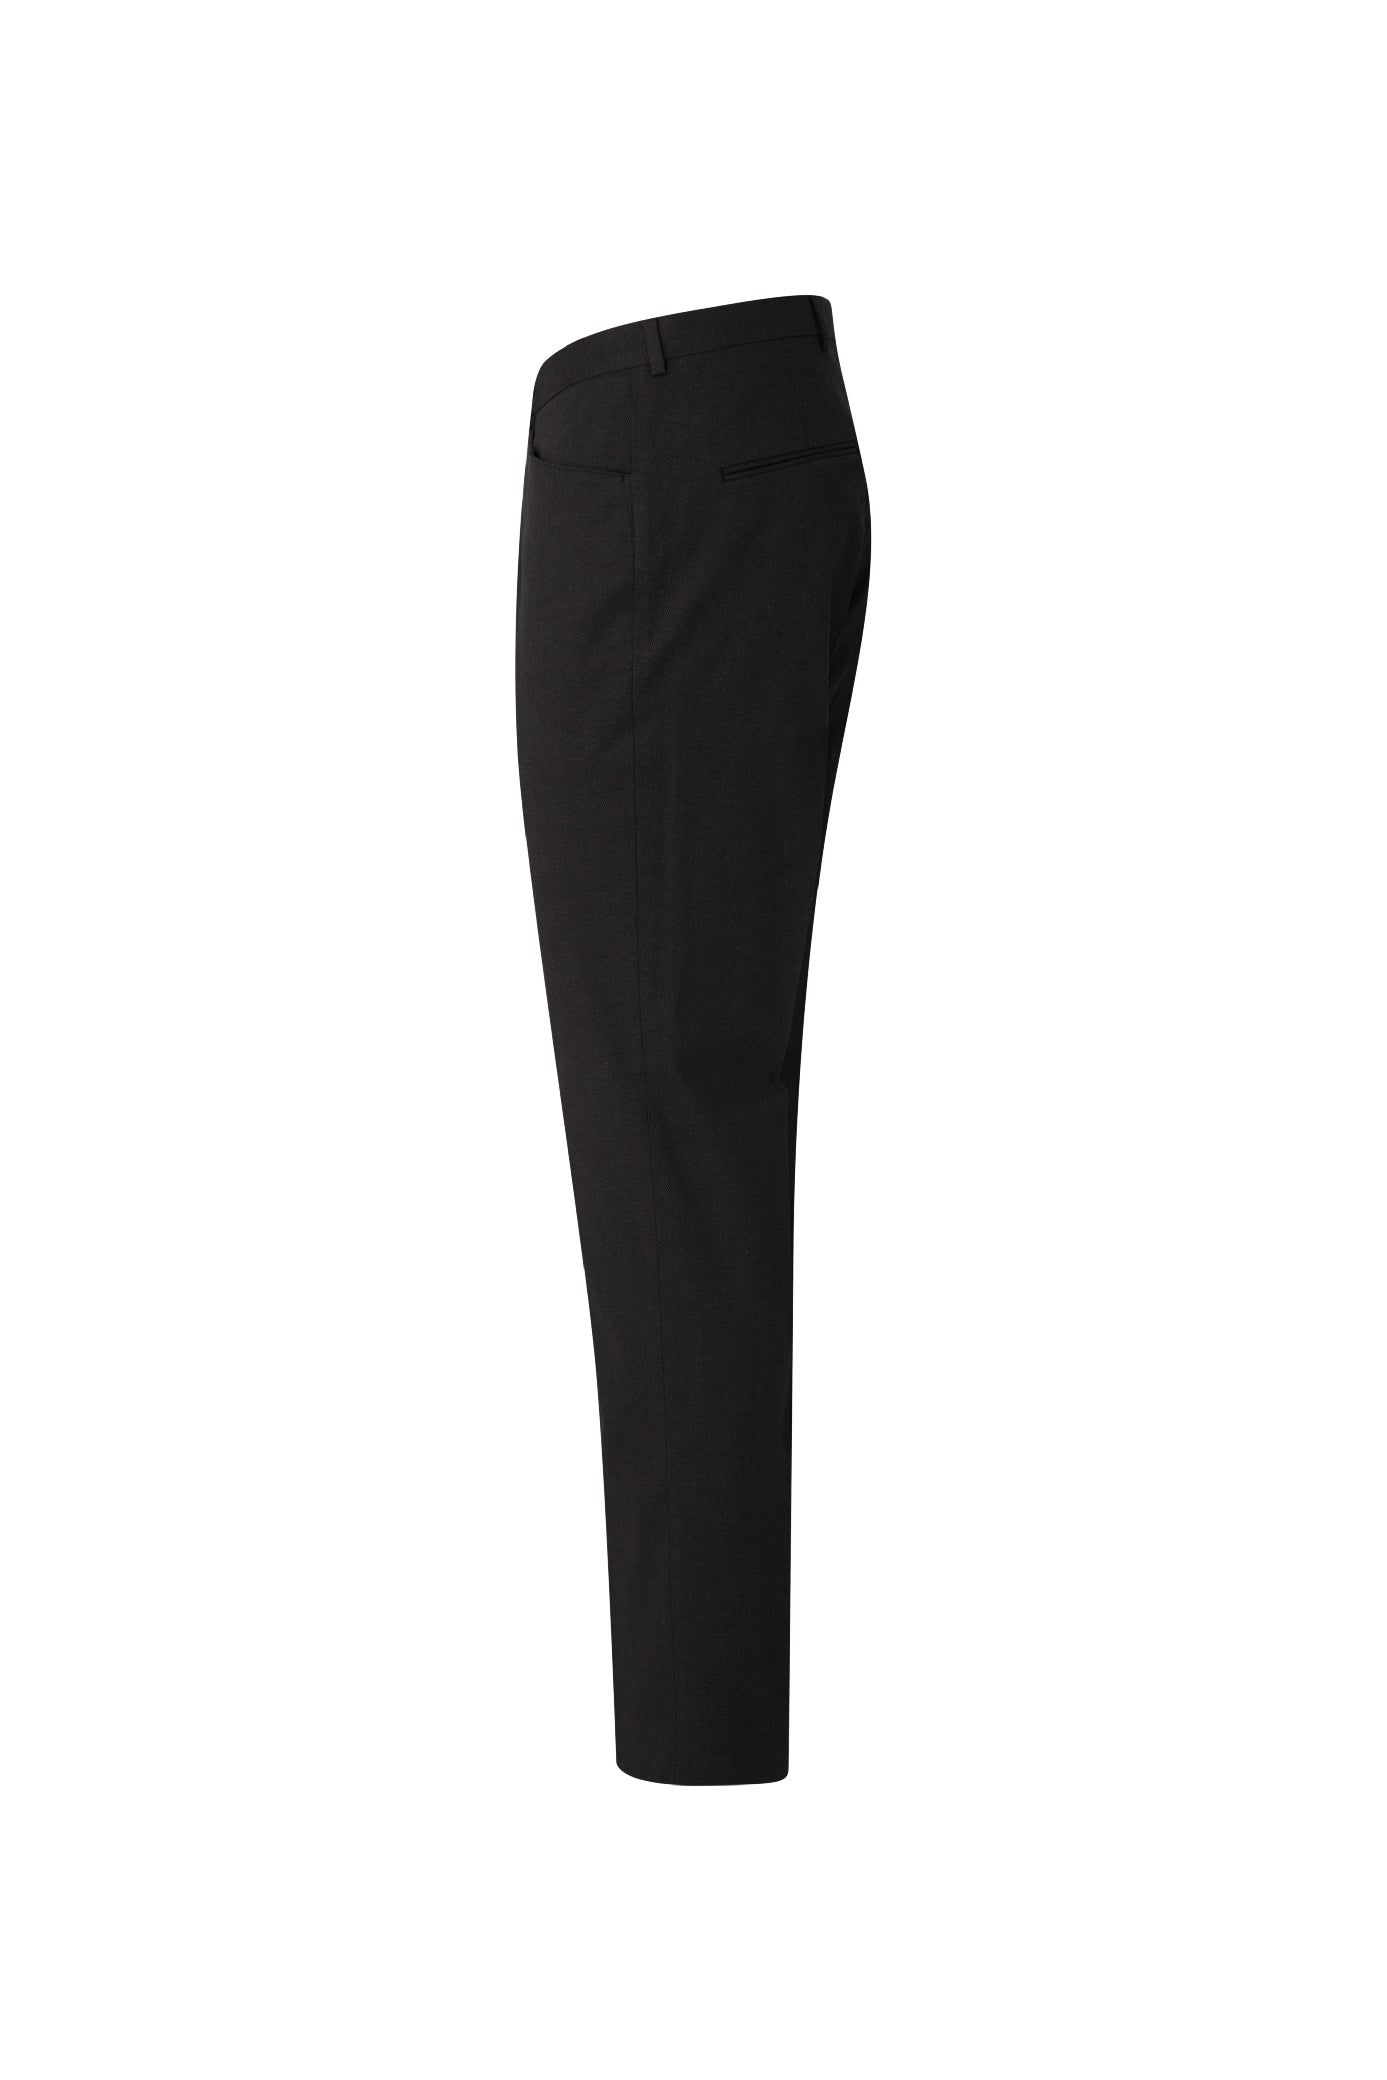 Reese cotton stretch structure trouser